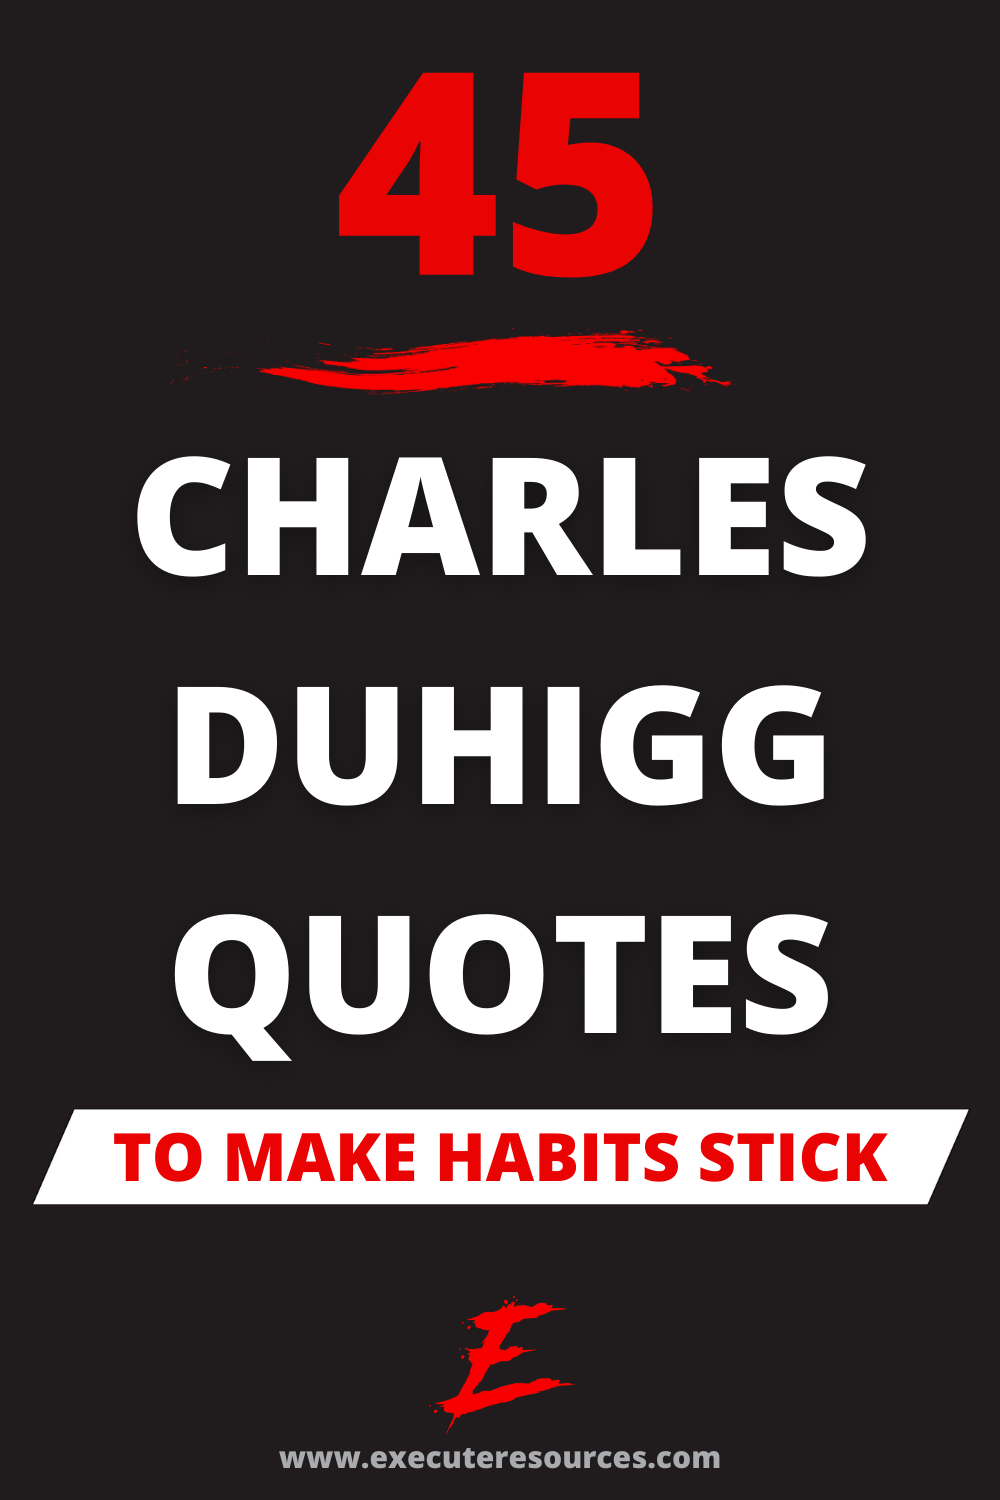 45 Empowering Charles Duhigg Quotes to Make Habits Stick - Execute